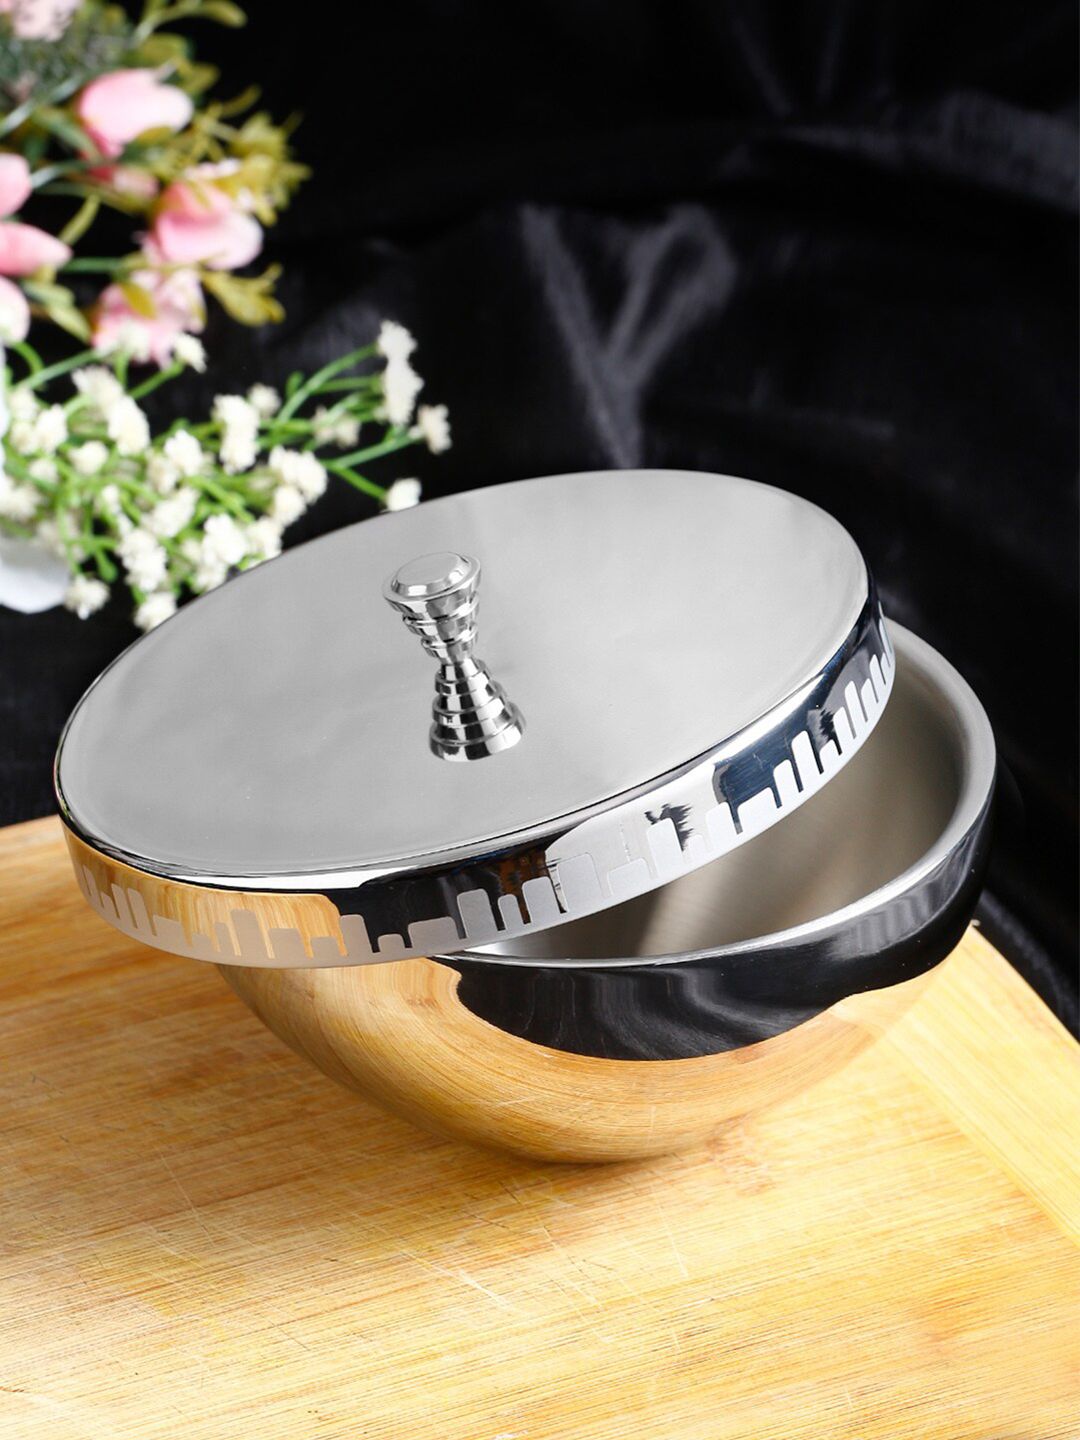 ARTTDINOX Silver-Toned Stainless Steel Glossy Urban Horizon Bowl With Lid Price in India